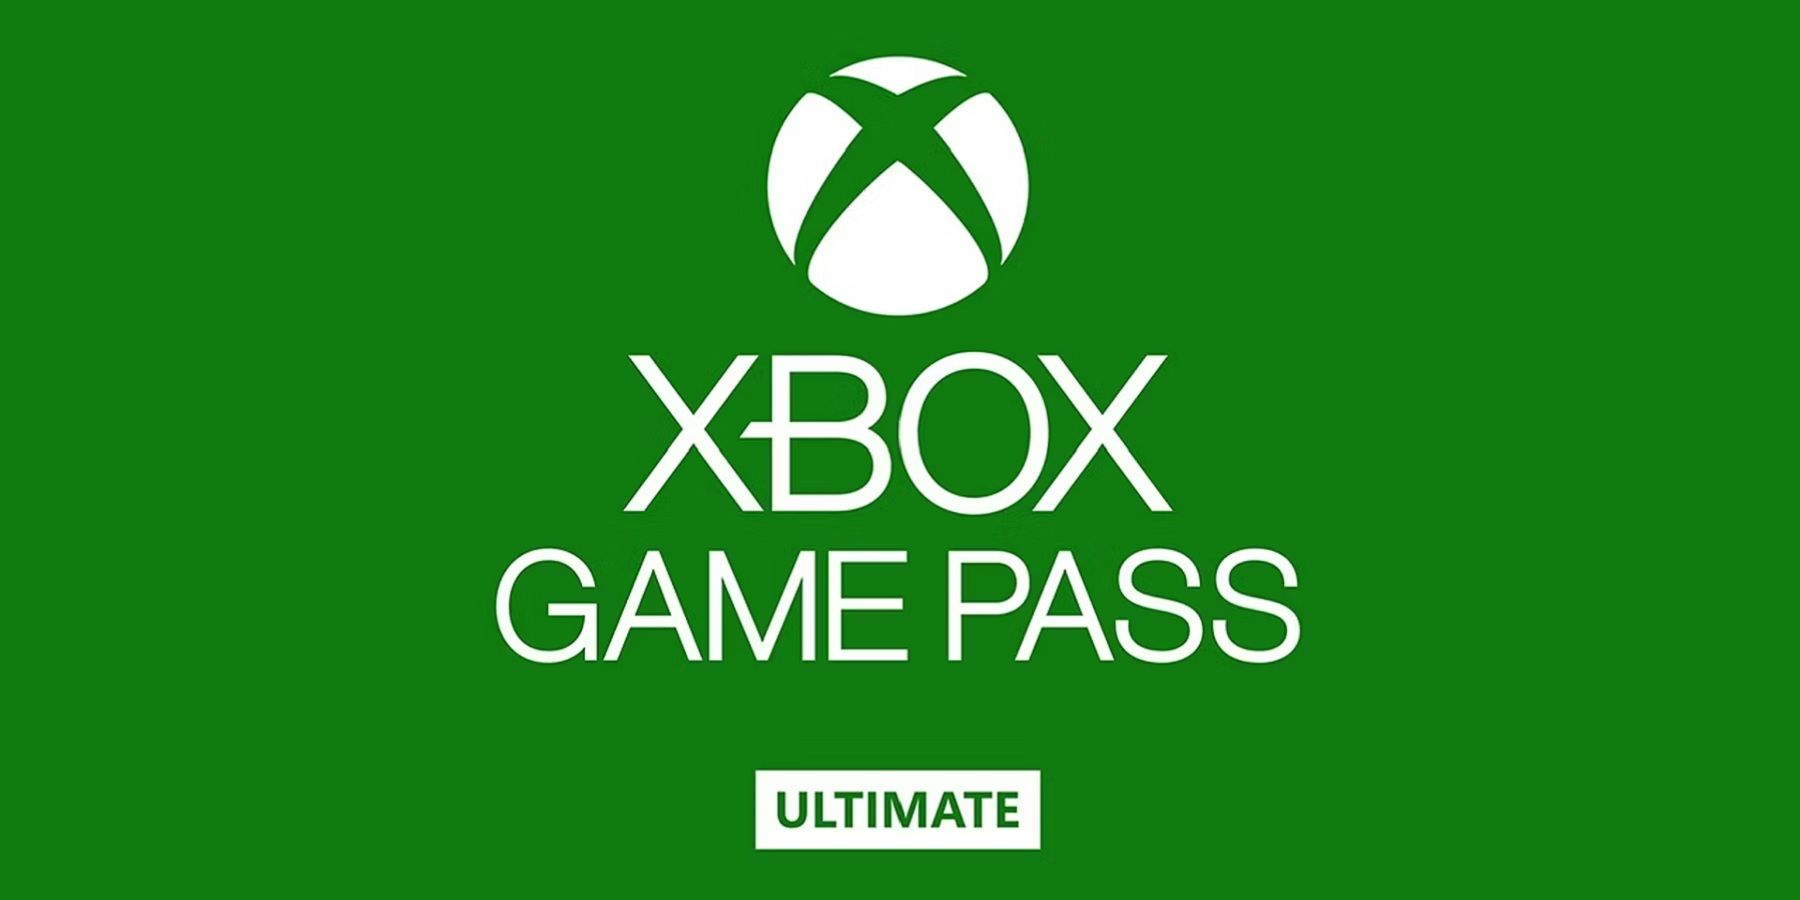 Xbox Game Pass Ultimate Adds 2 New Games Today